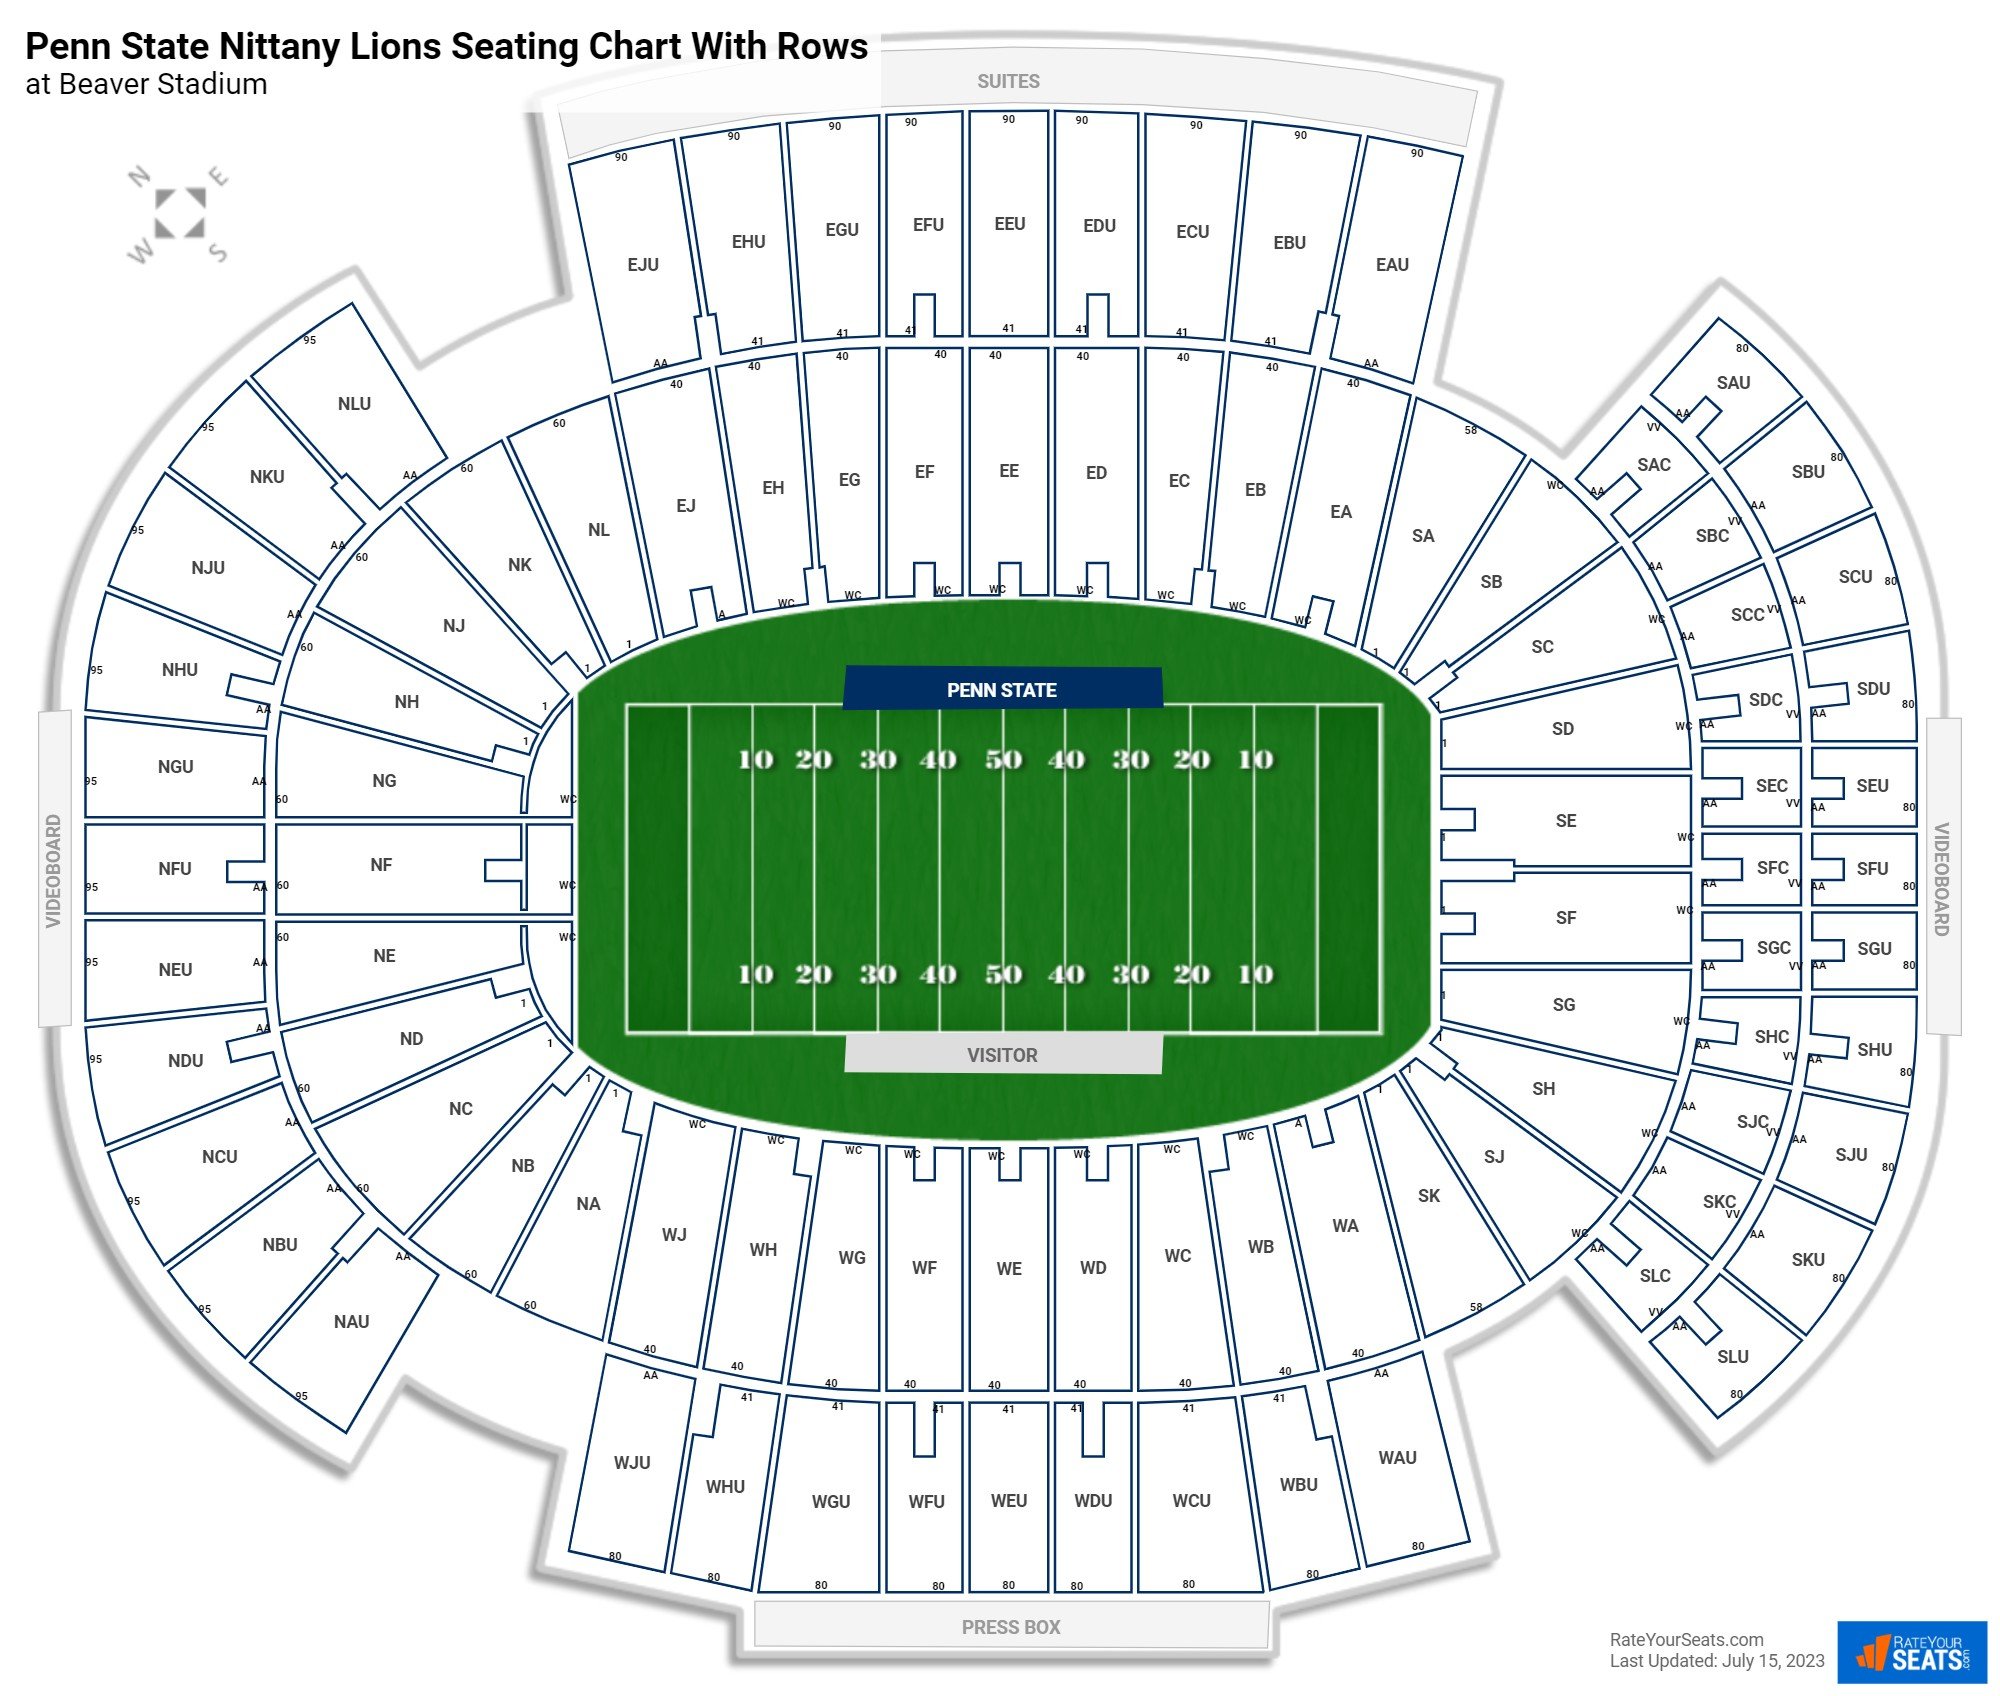 Beaver Stadium seating chart with row numbers